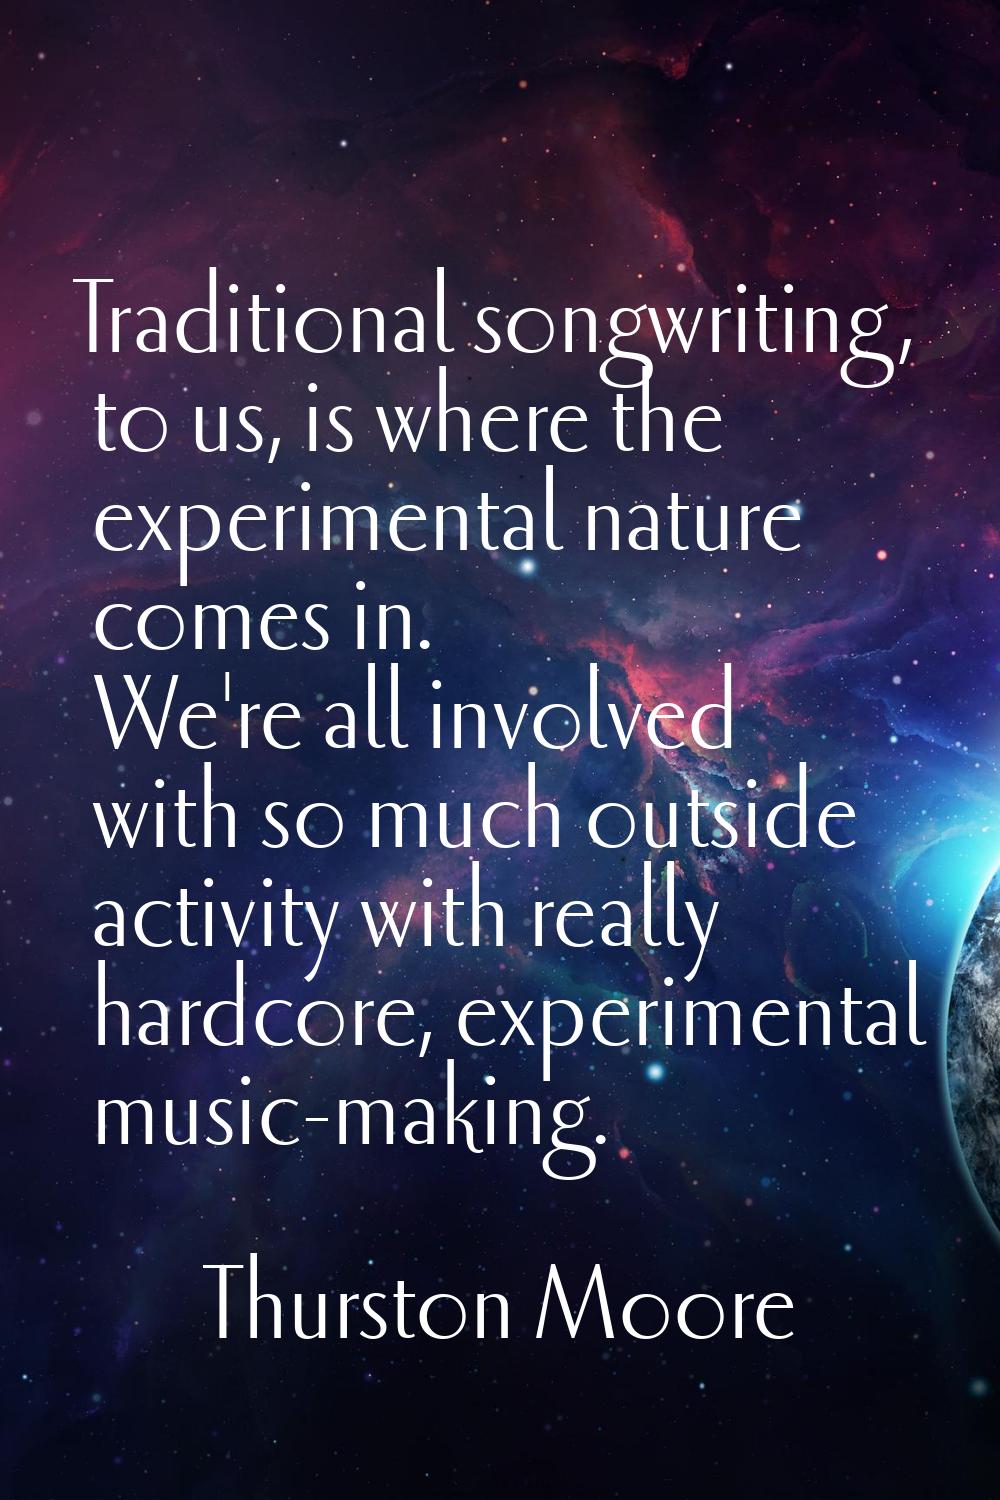 Traditional songwriting, to us, is where the experimental nature comes in. We're all involved with 